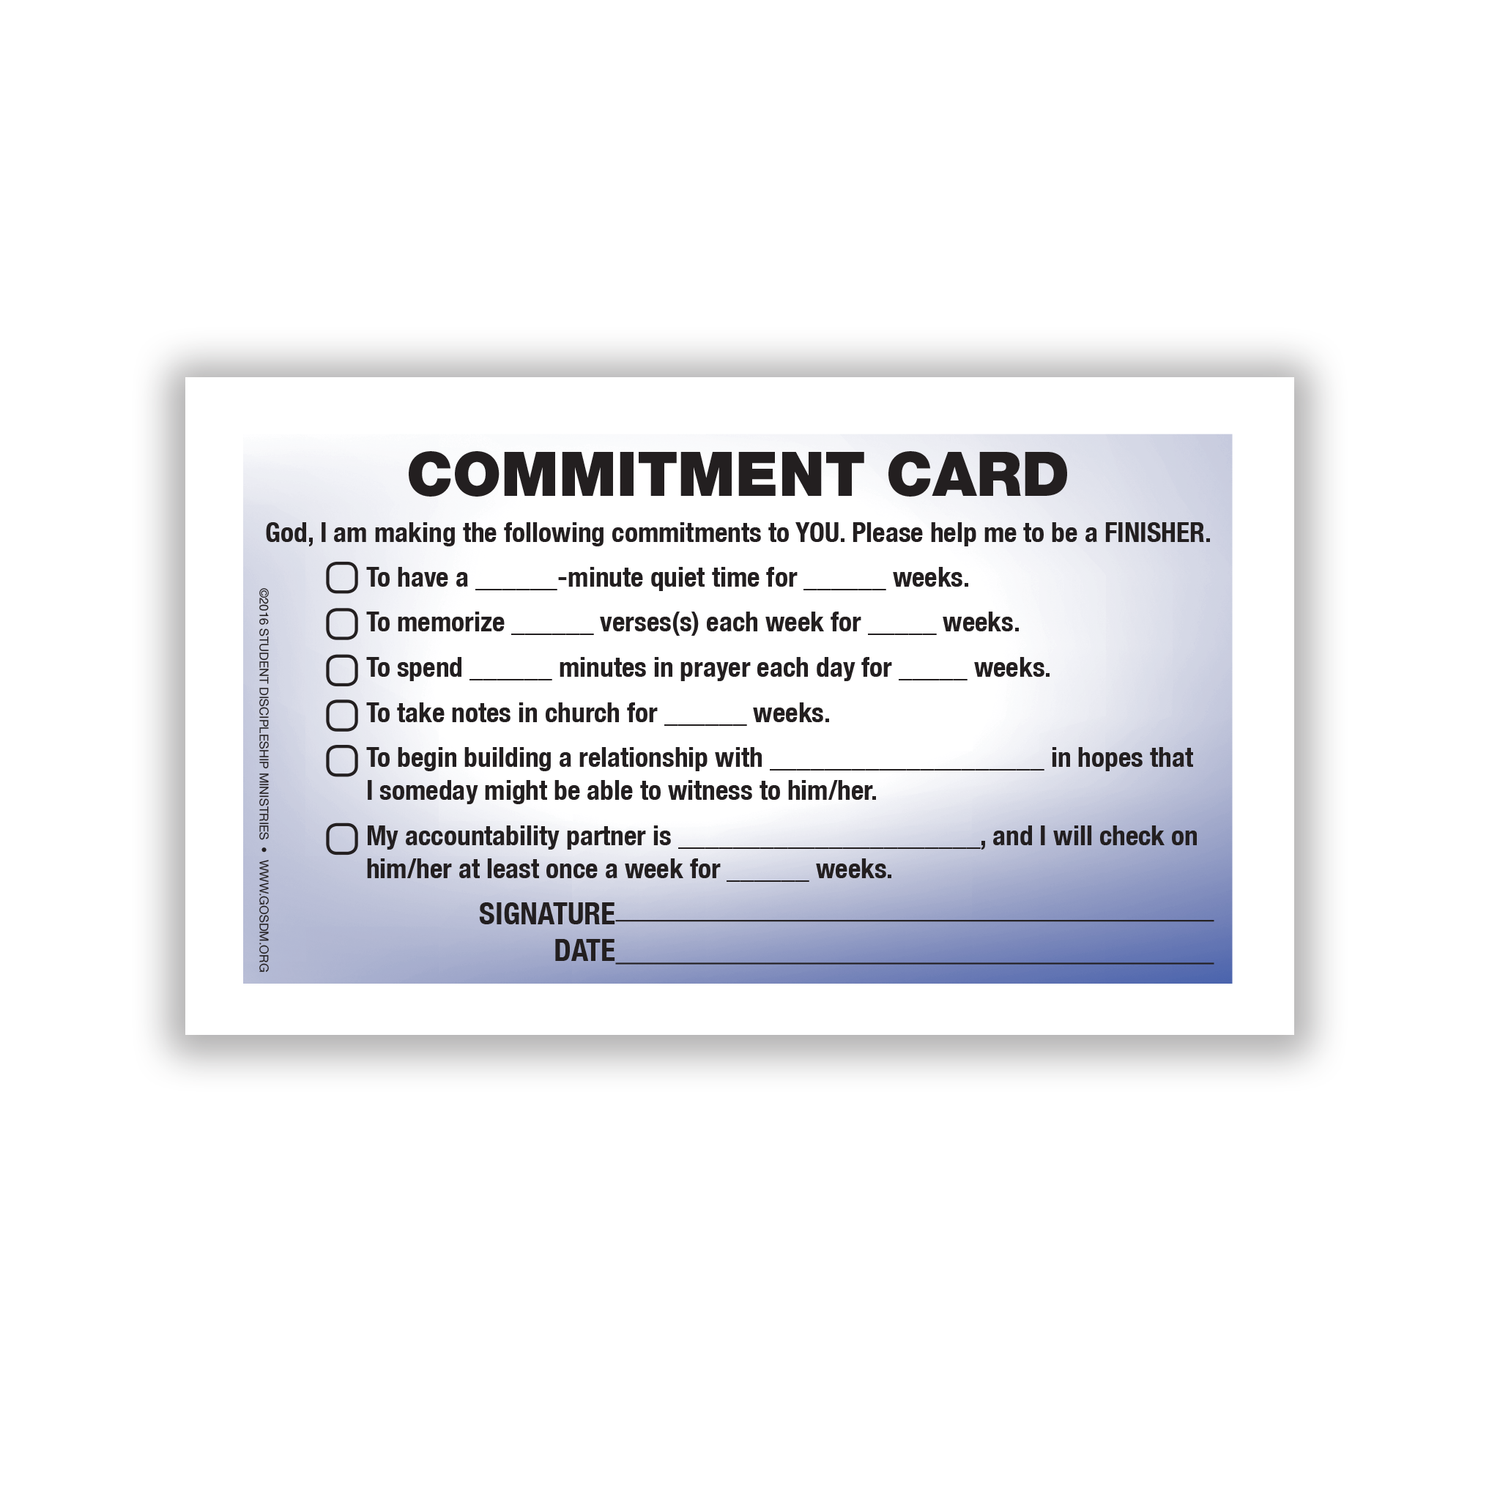 All Commitment Cards